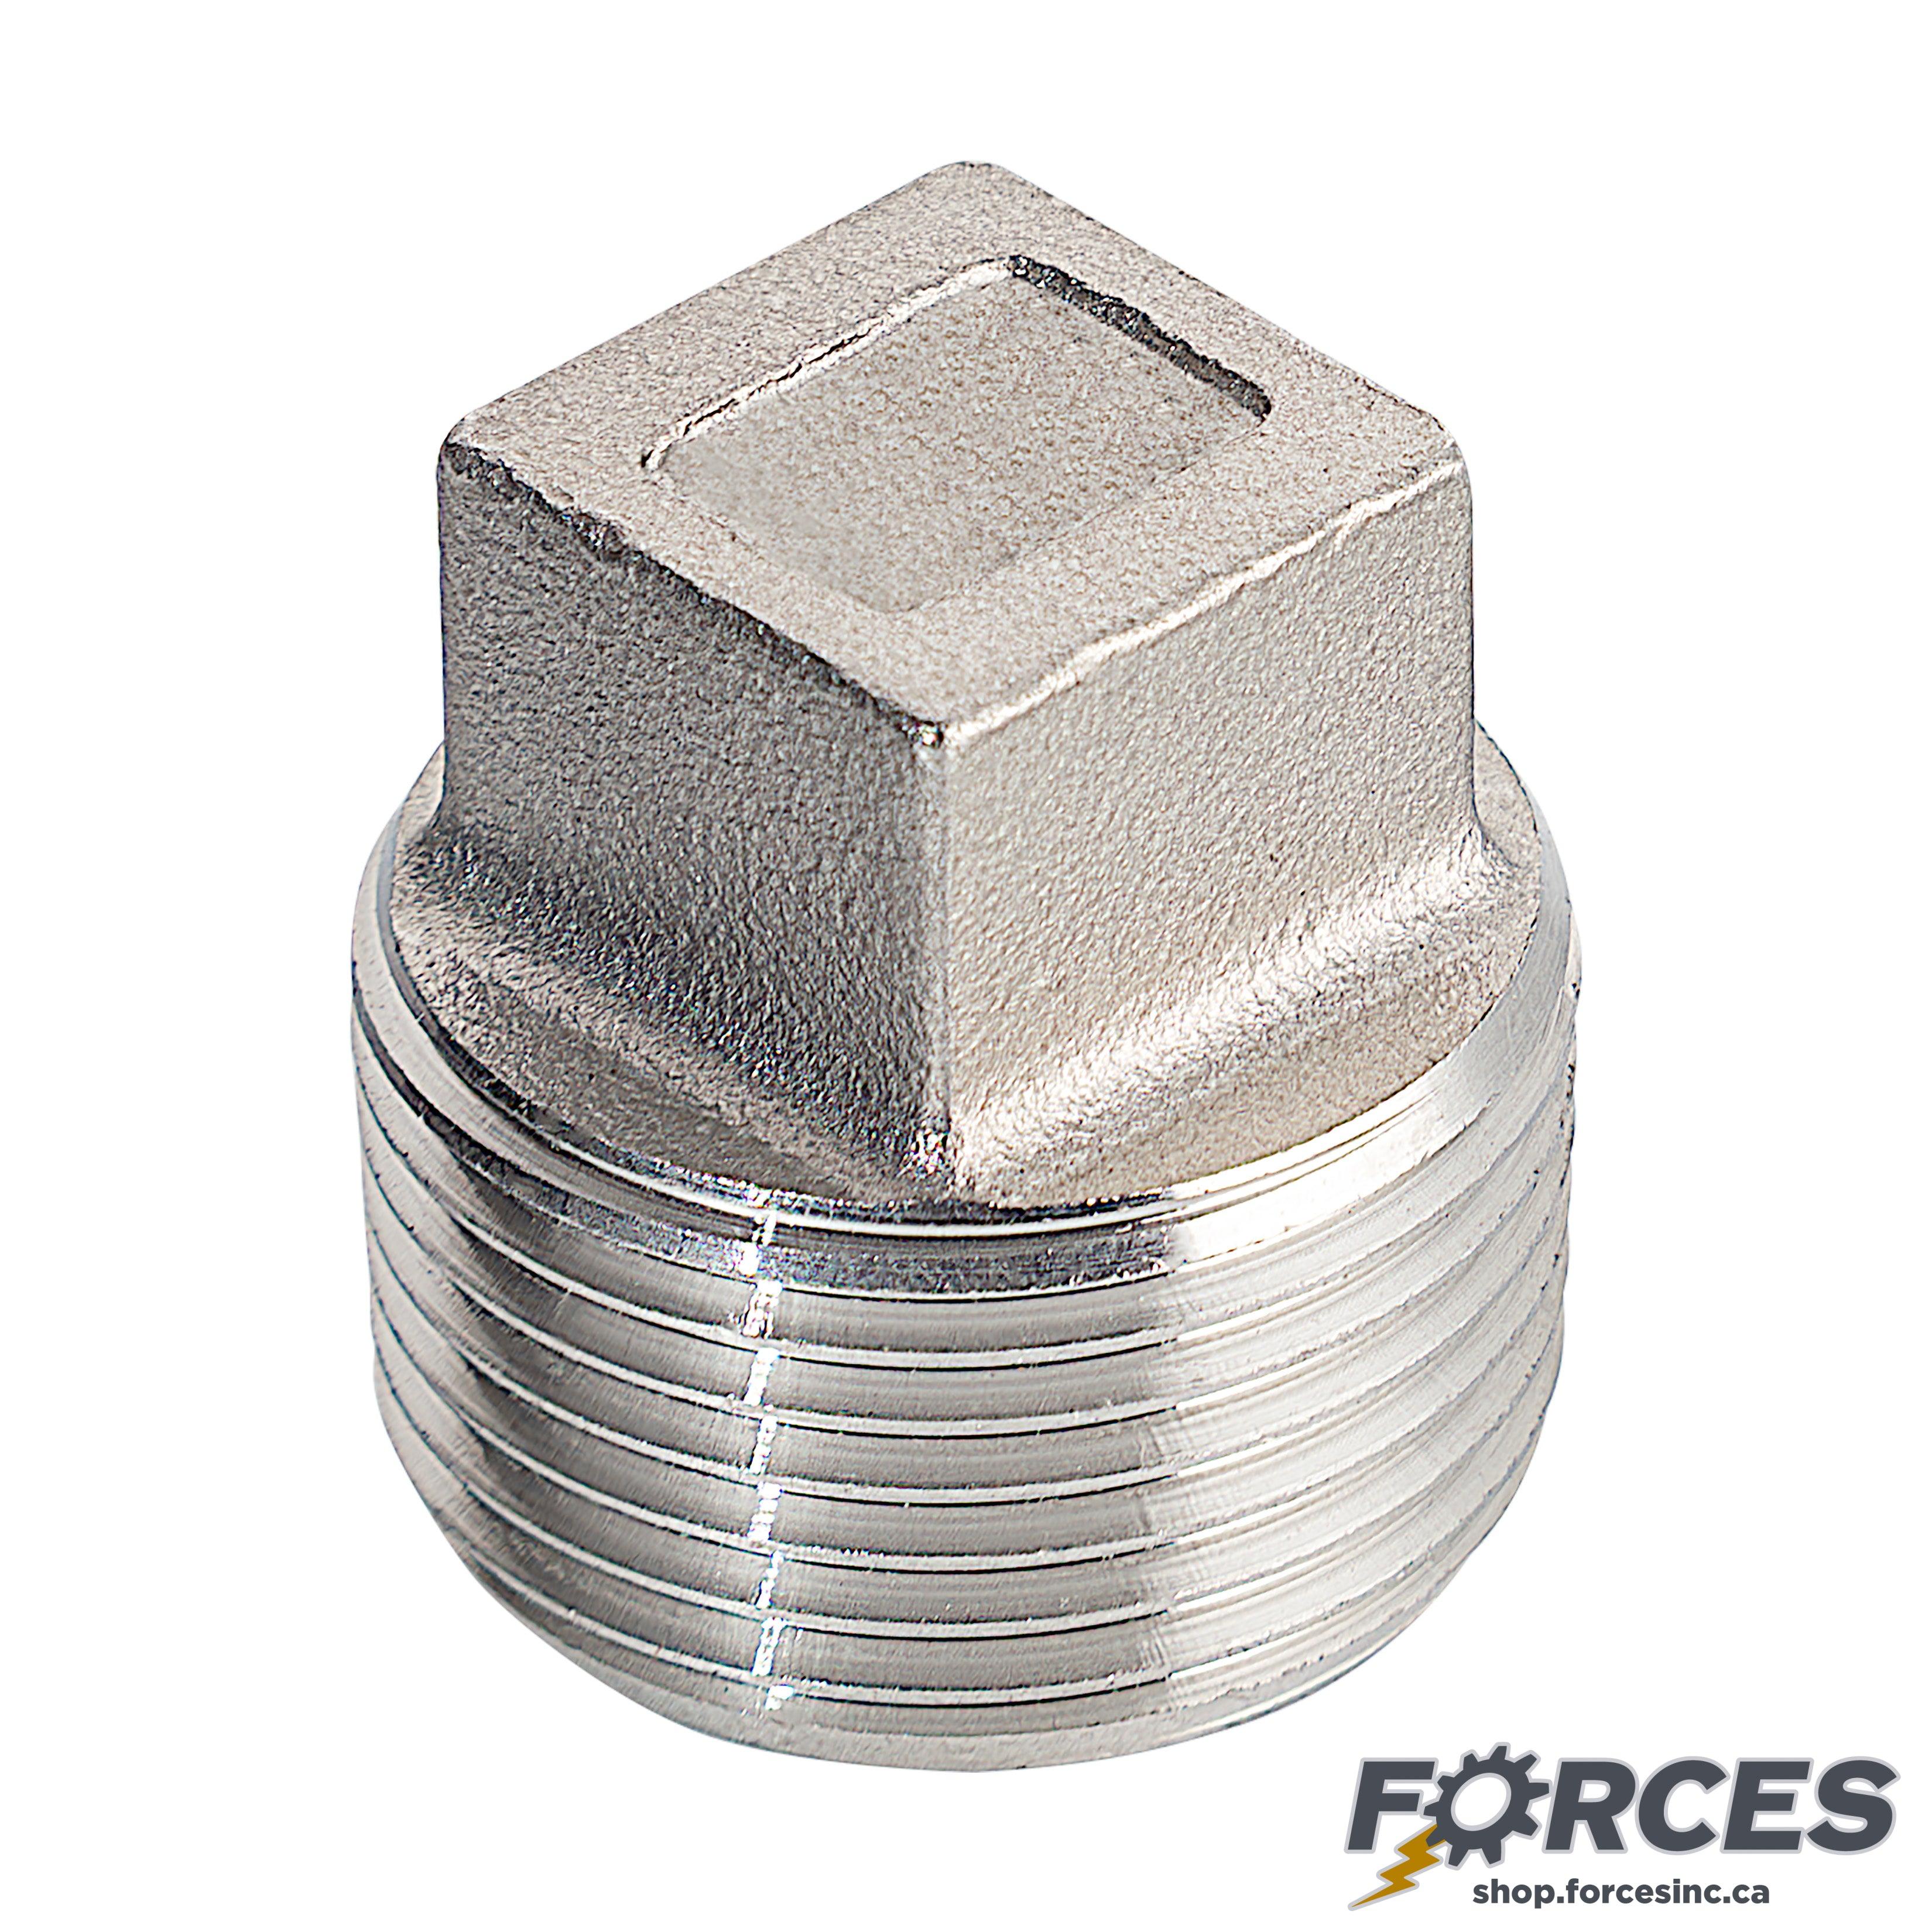 3/8" Square Plug NPT #150 - Stainless Steel 316 - Forces Inc